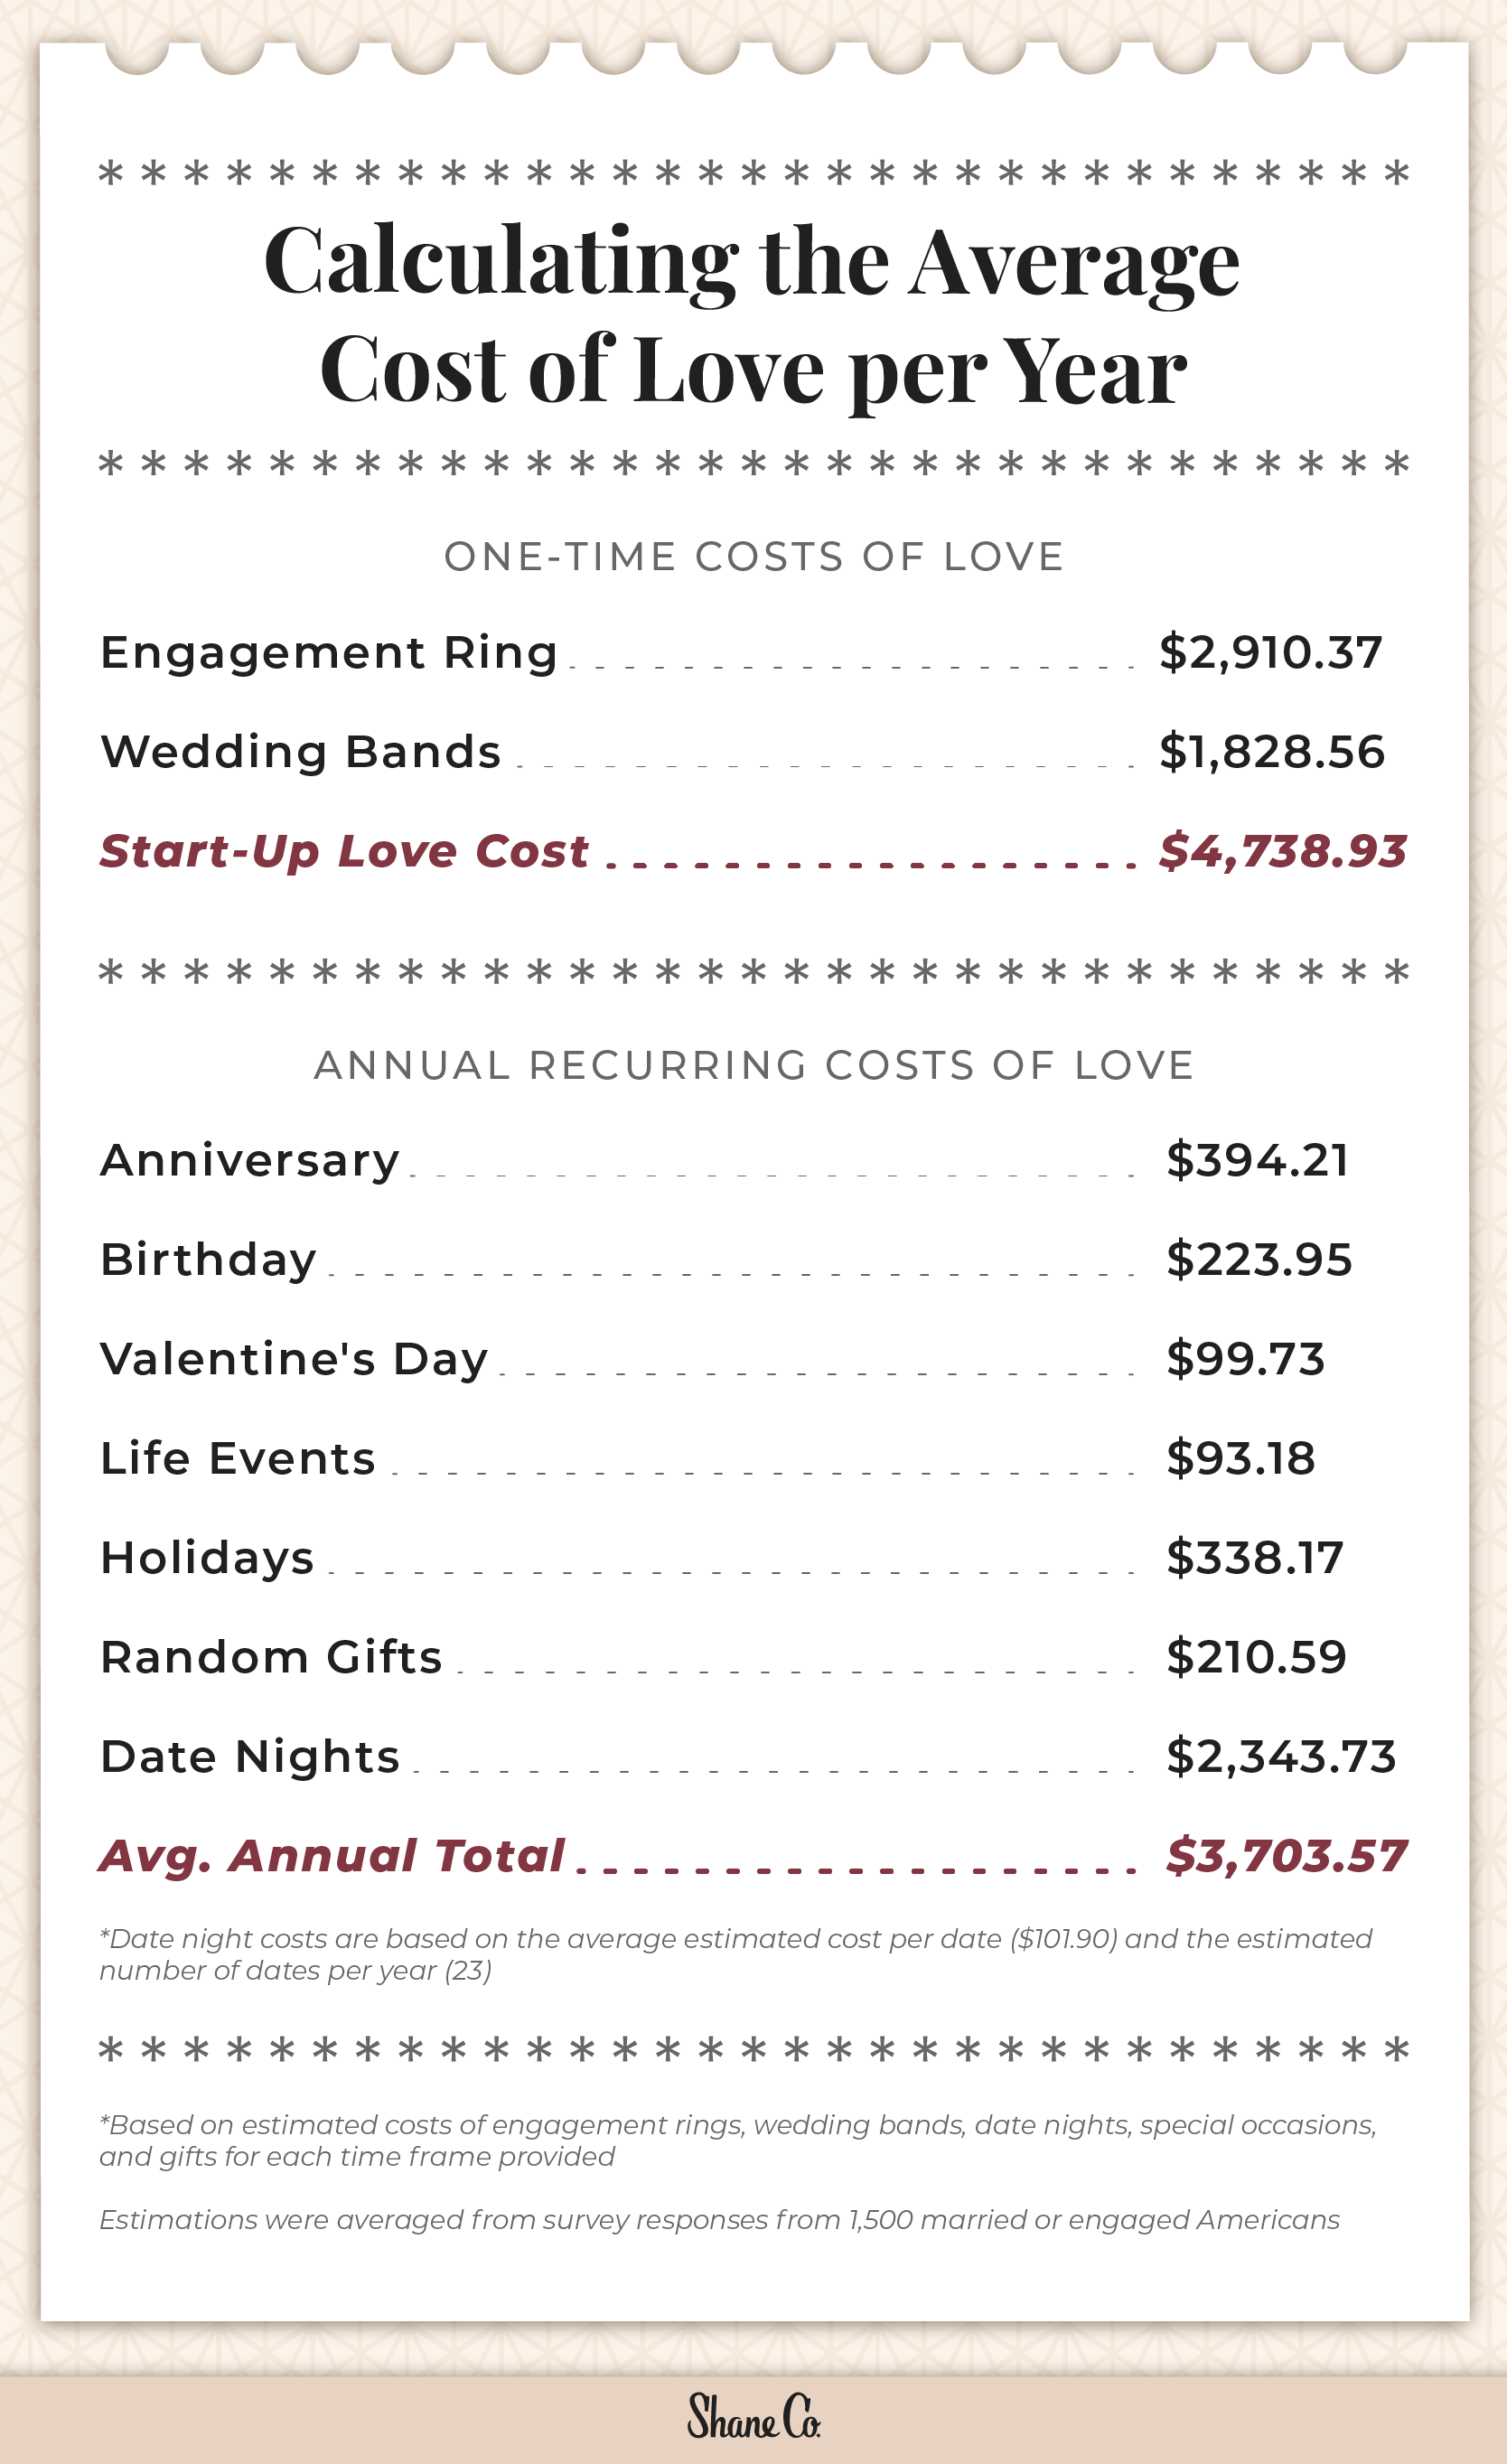 A graphic showing an itemized list of how much people spend on relationships throughout the year 